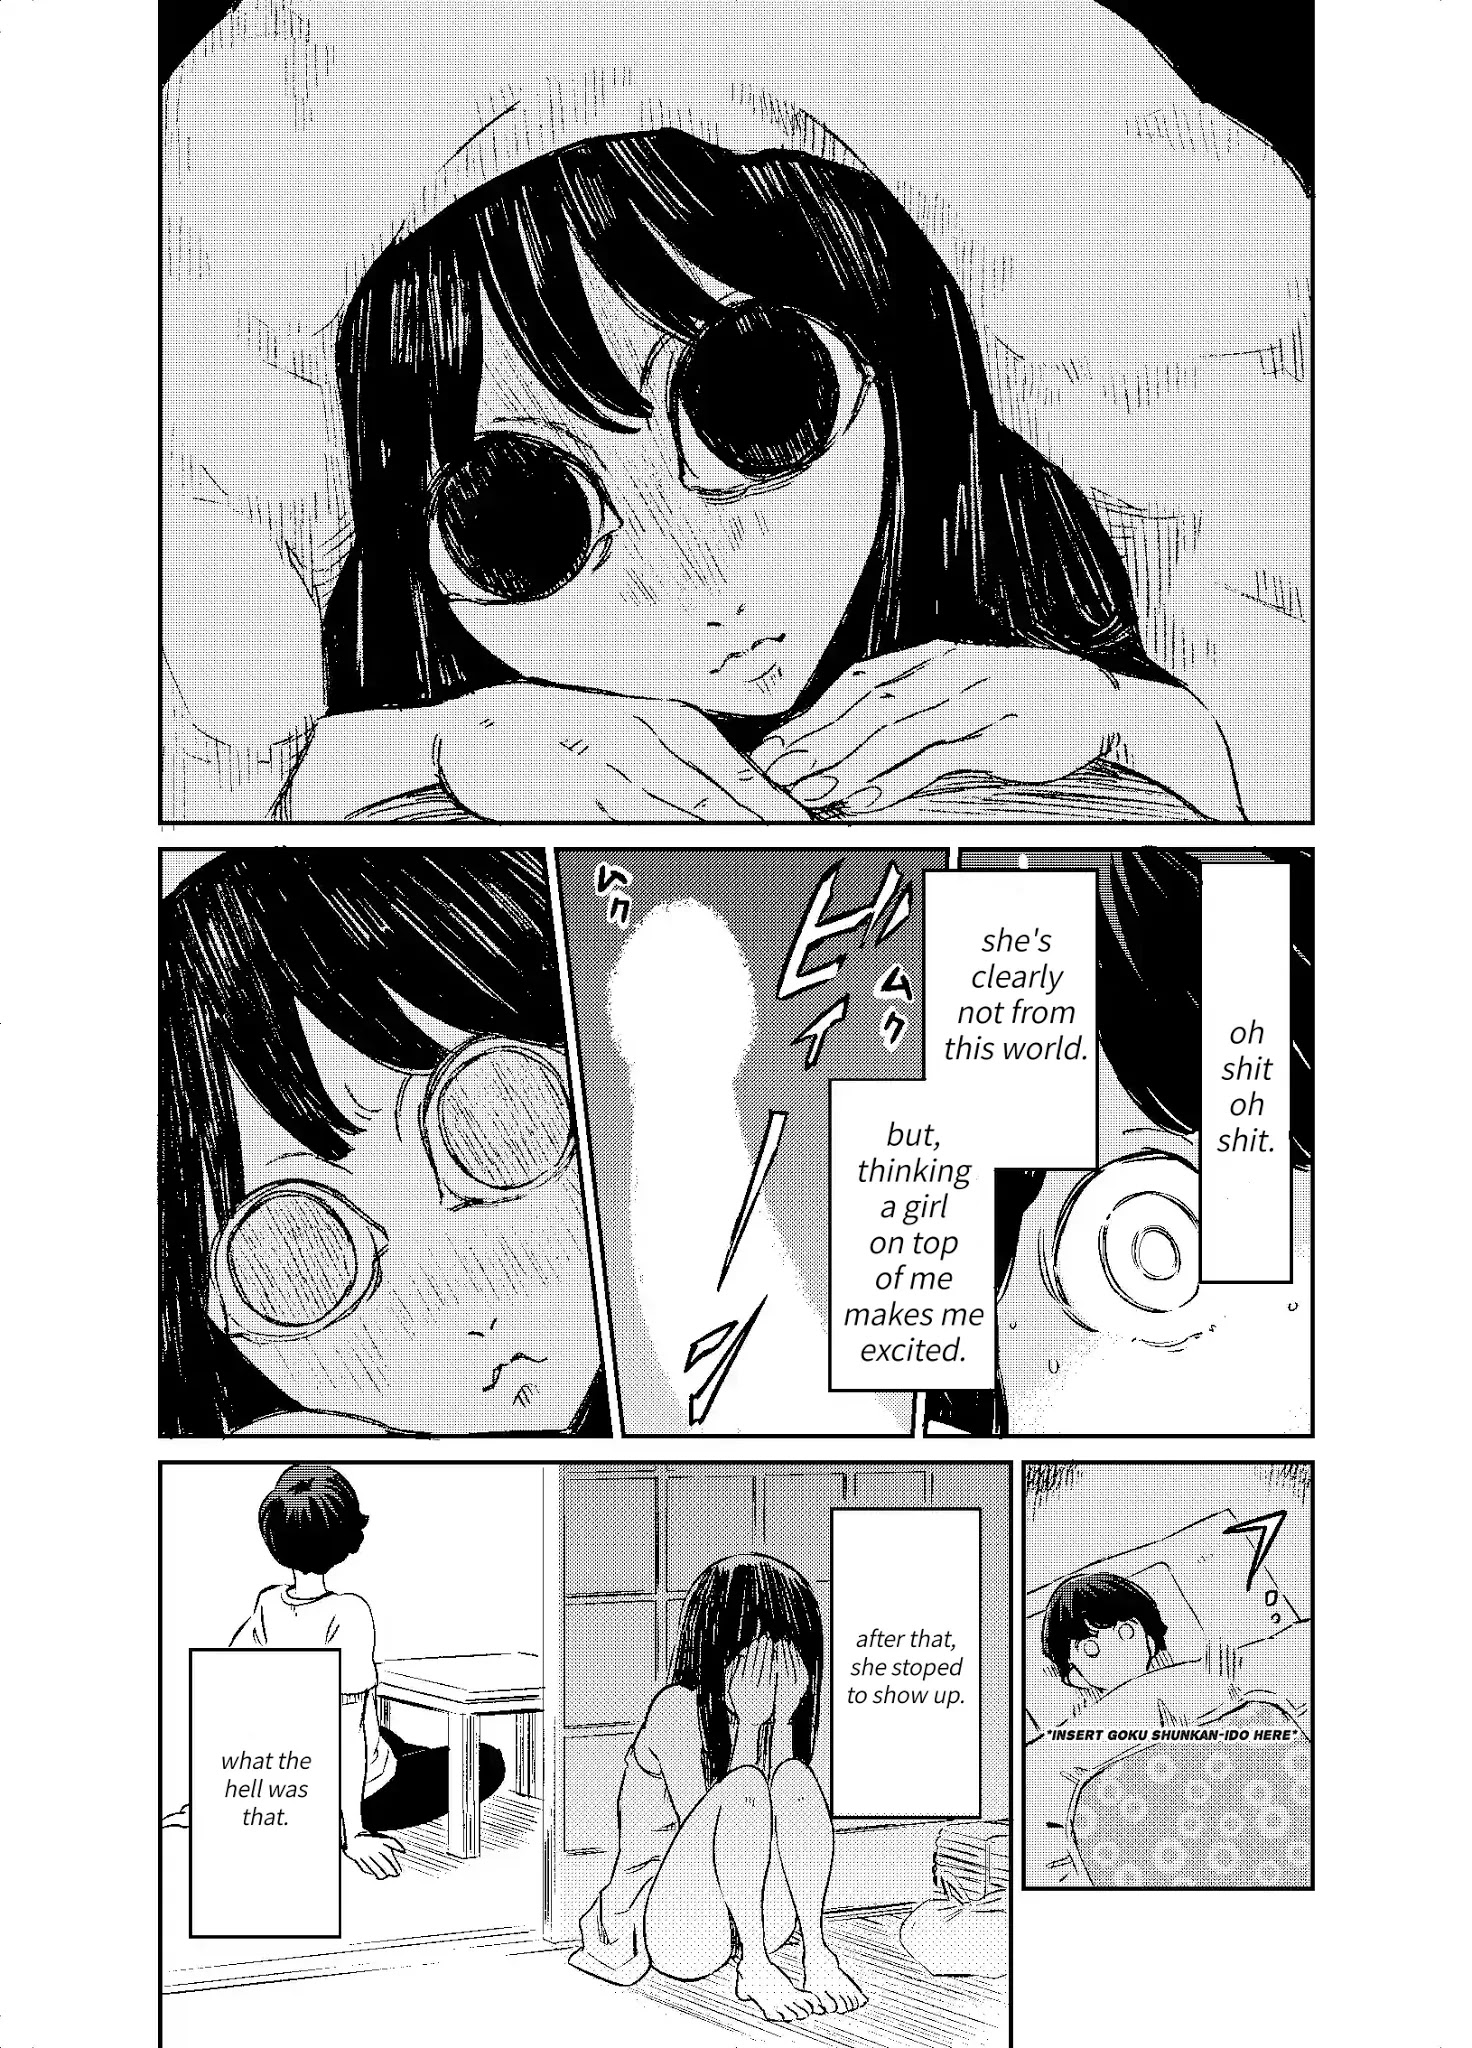 My Roommate Isn't From This World - Page 2